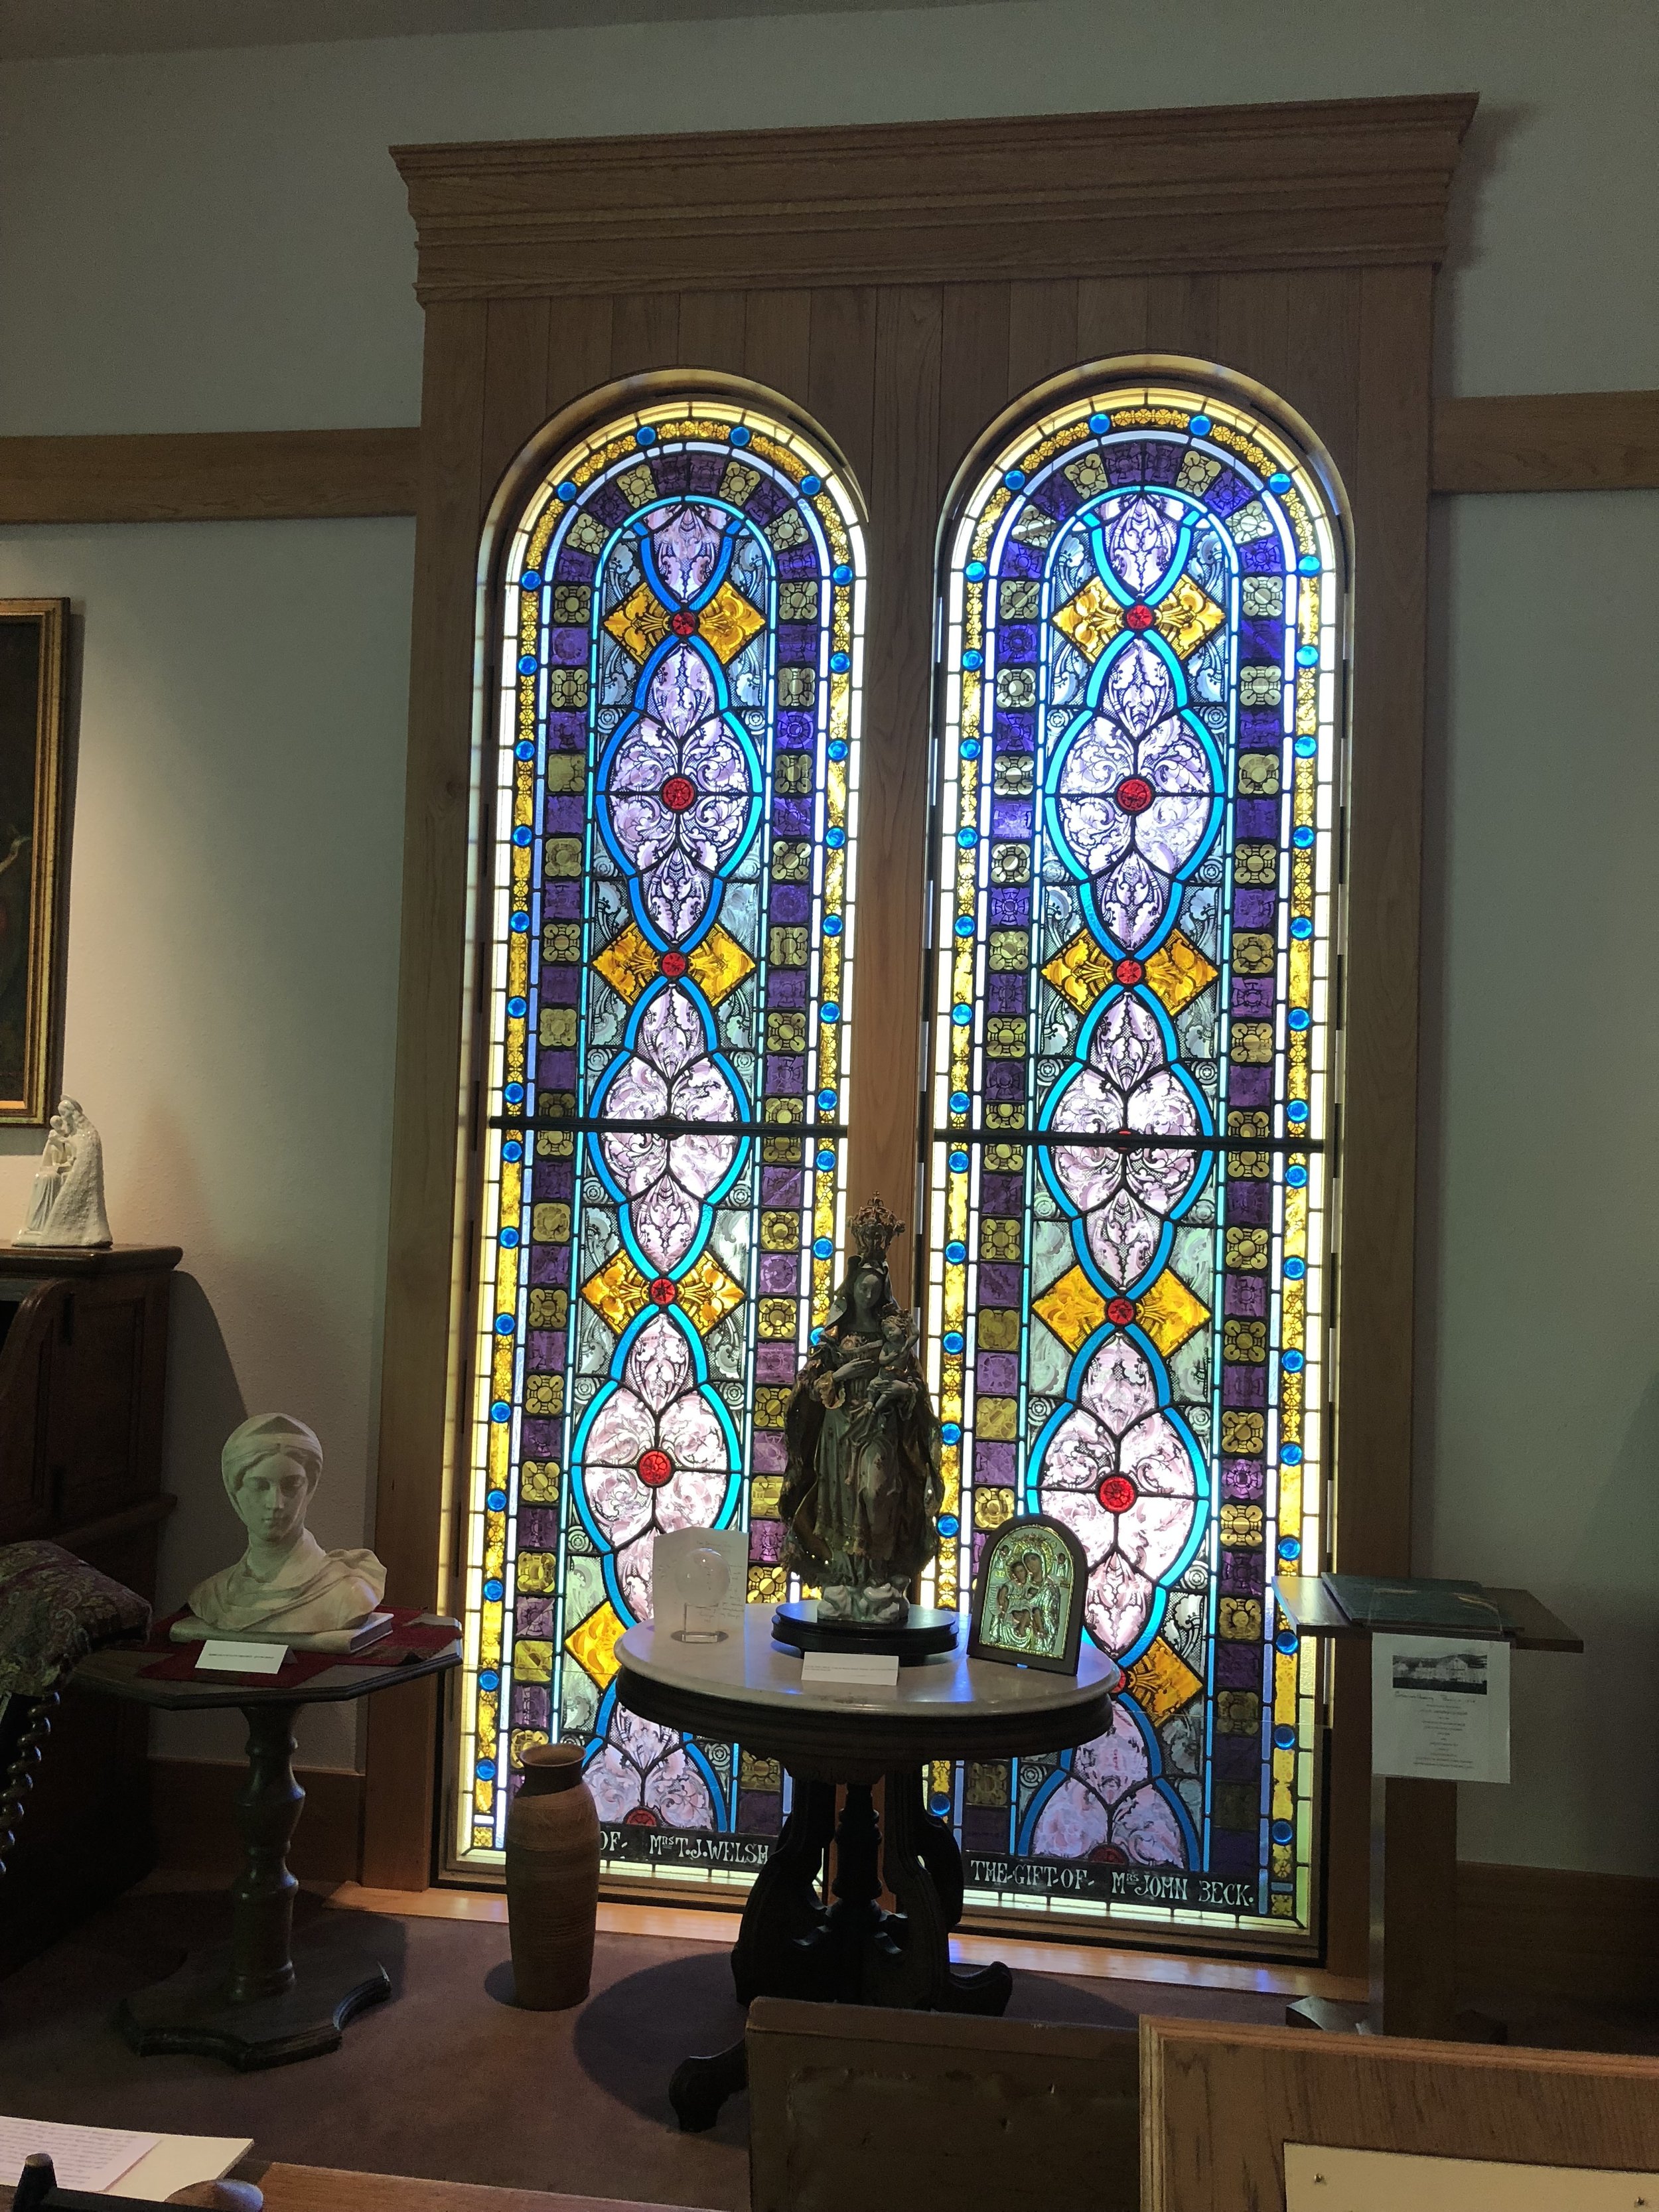  Heritage Room windows | © 2018 Lucas Stained Glass Design + Restoration 